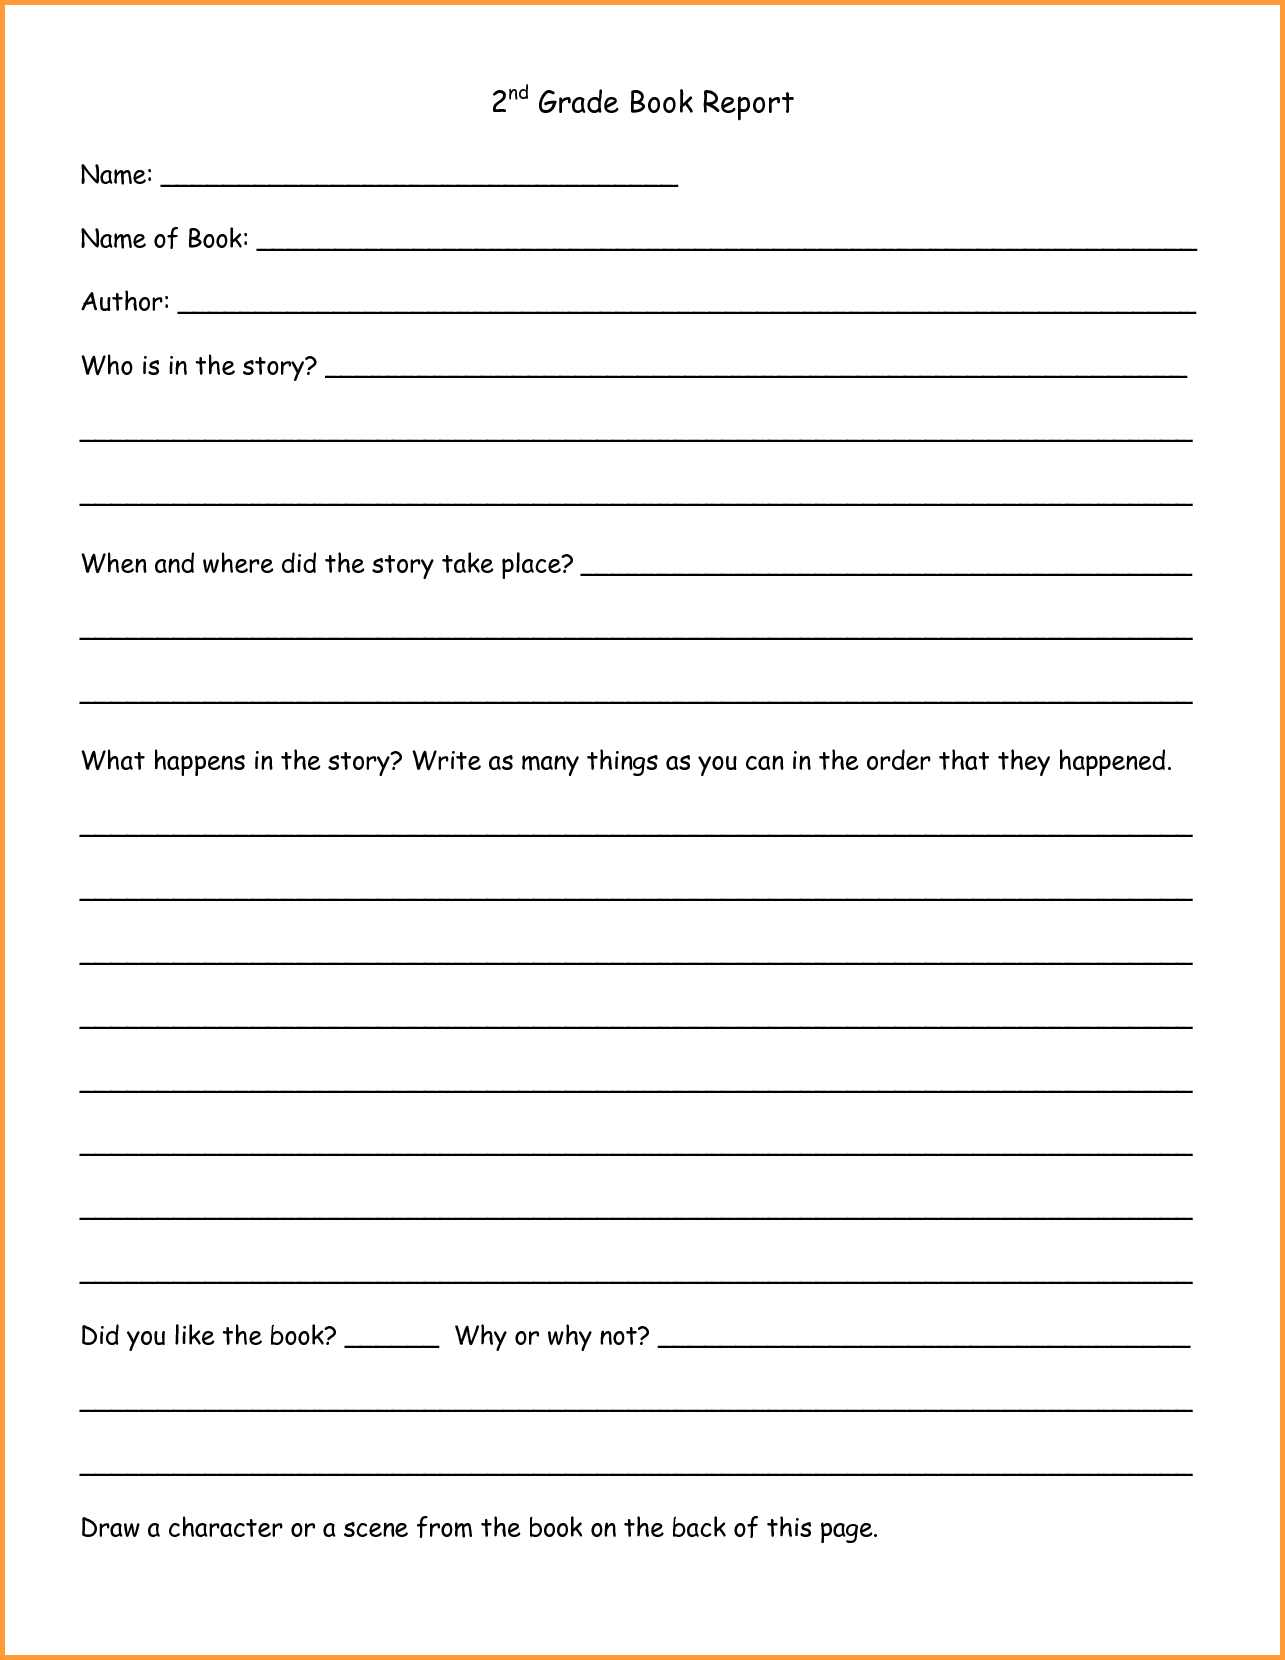 Story Report Template – Zohre.horizonconsulting.co Inside Second Grade Book Report Template